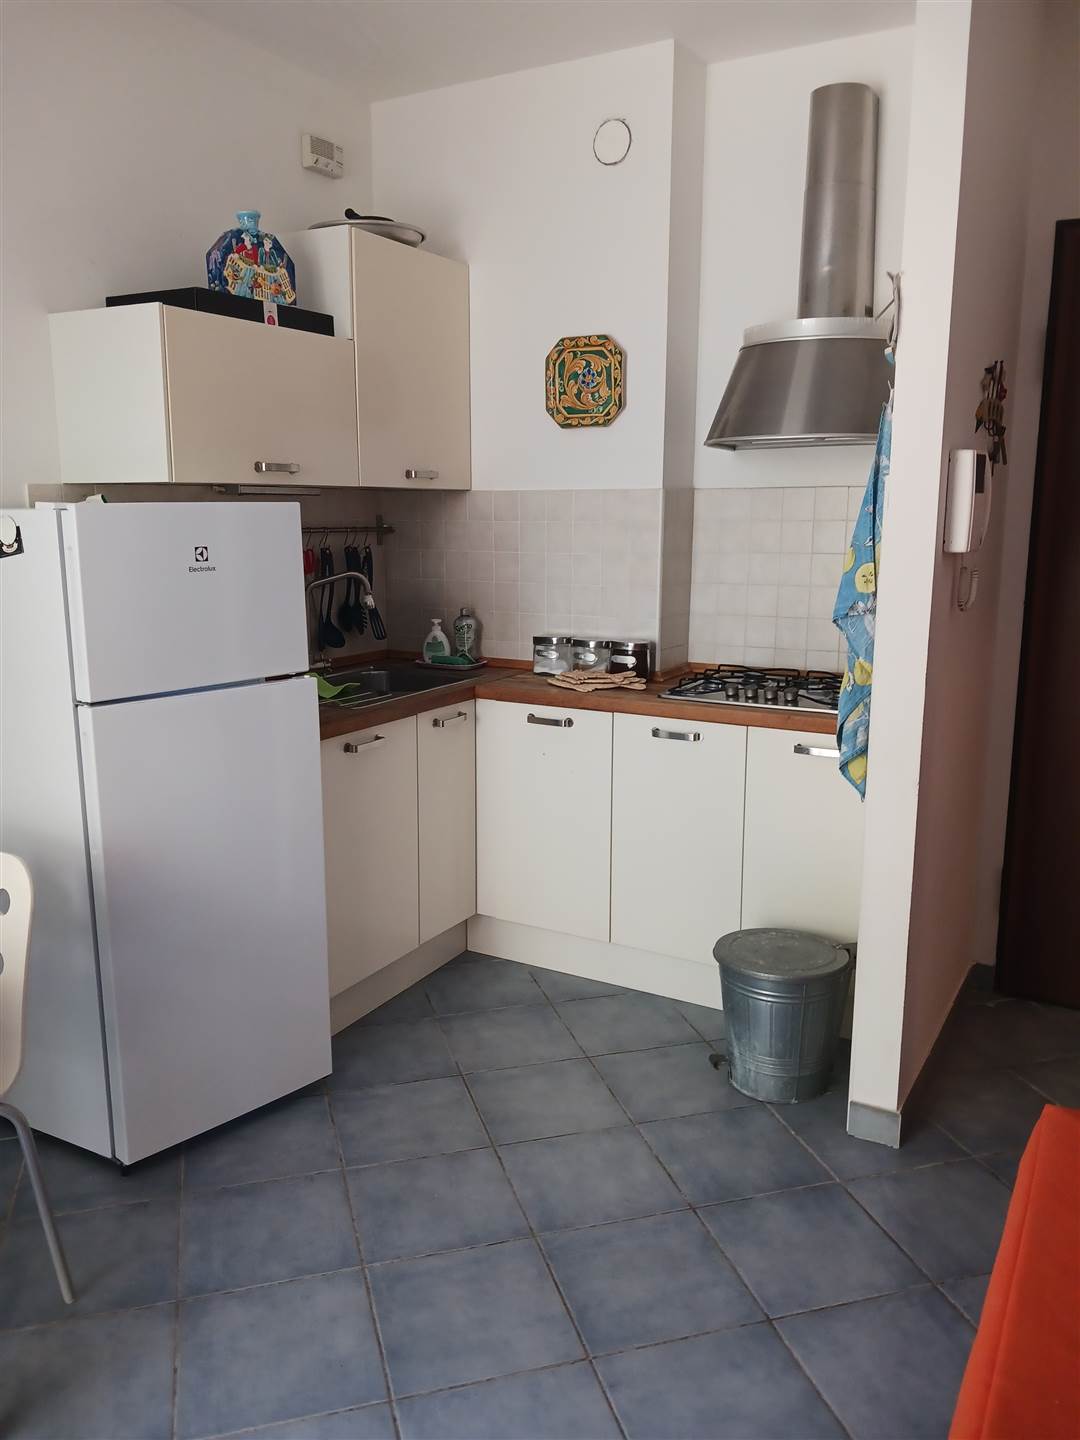 NOLI, Apartment for sale of 35 Sq. mt., Good condition, Heating Individual heating system, Energetic class: G, placed at 2° on 3, composed by: 2 